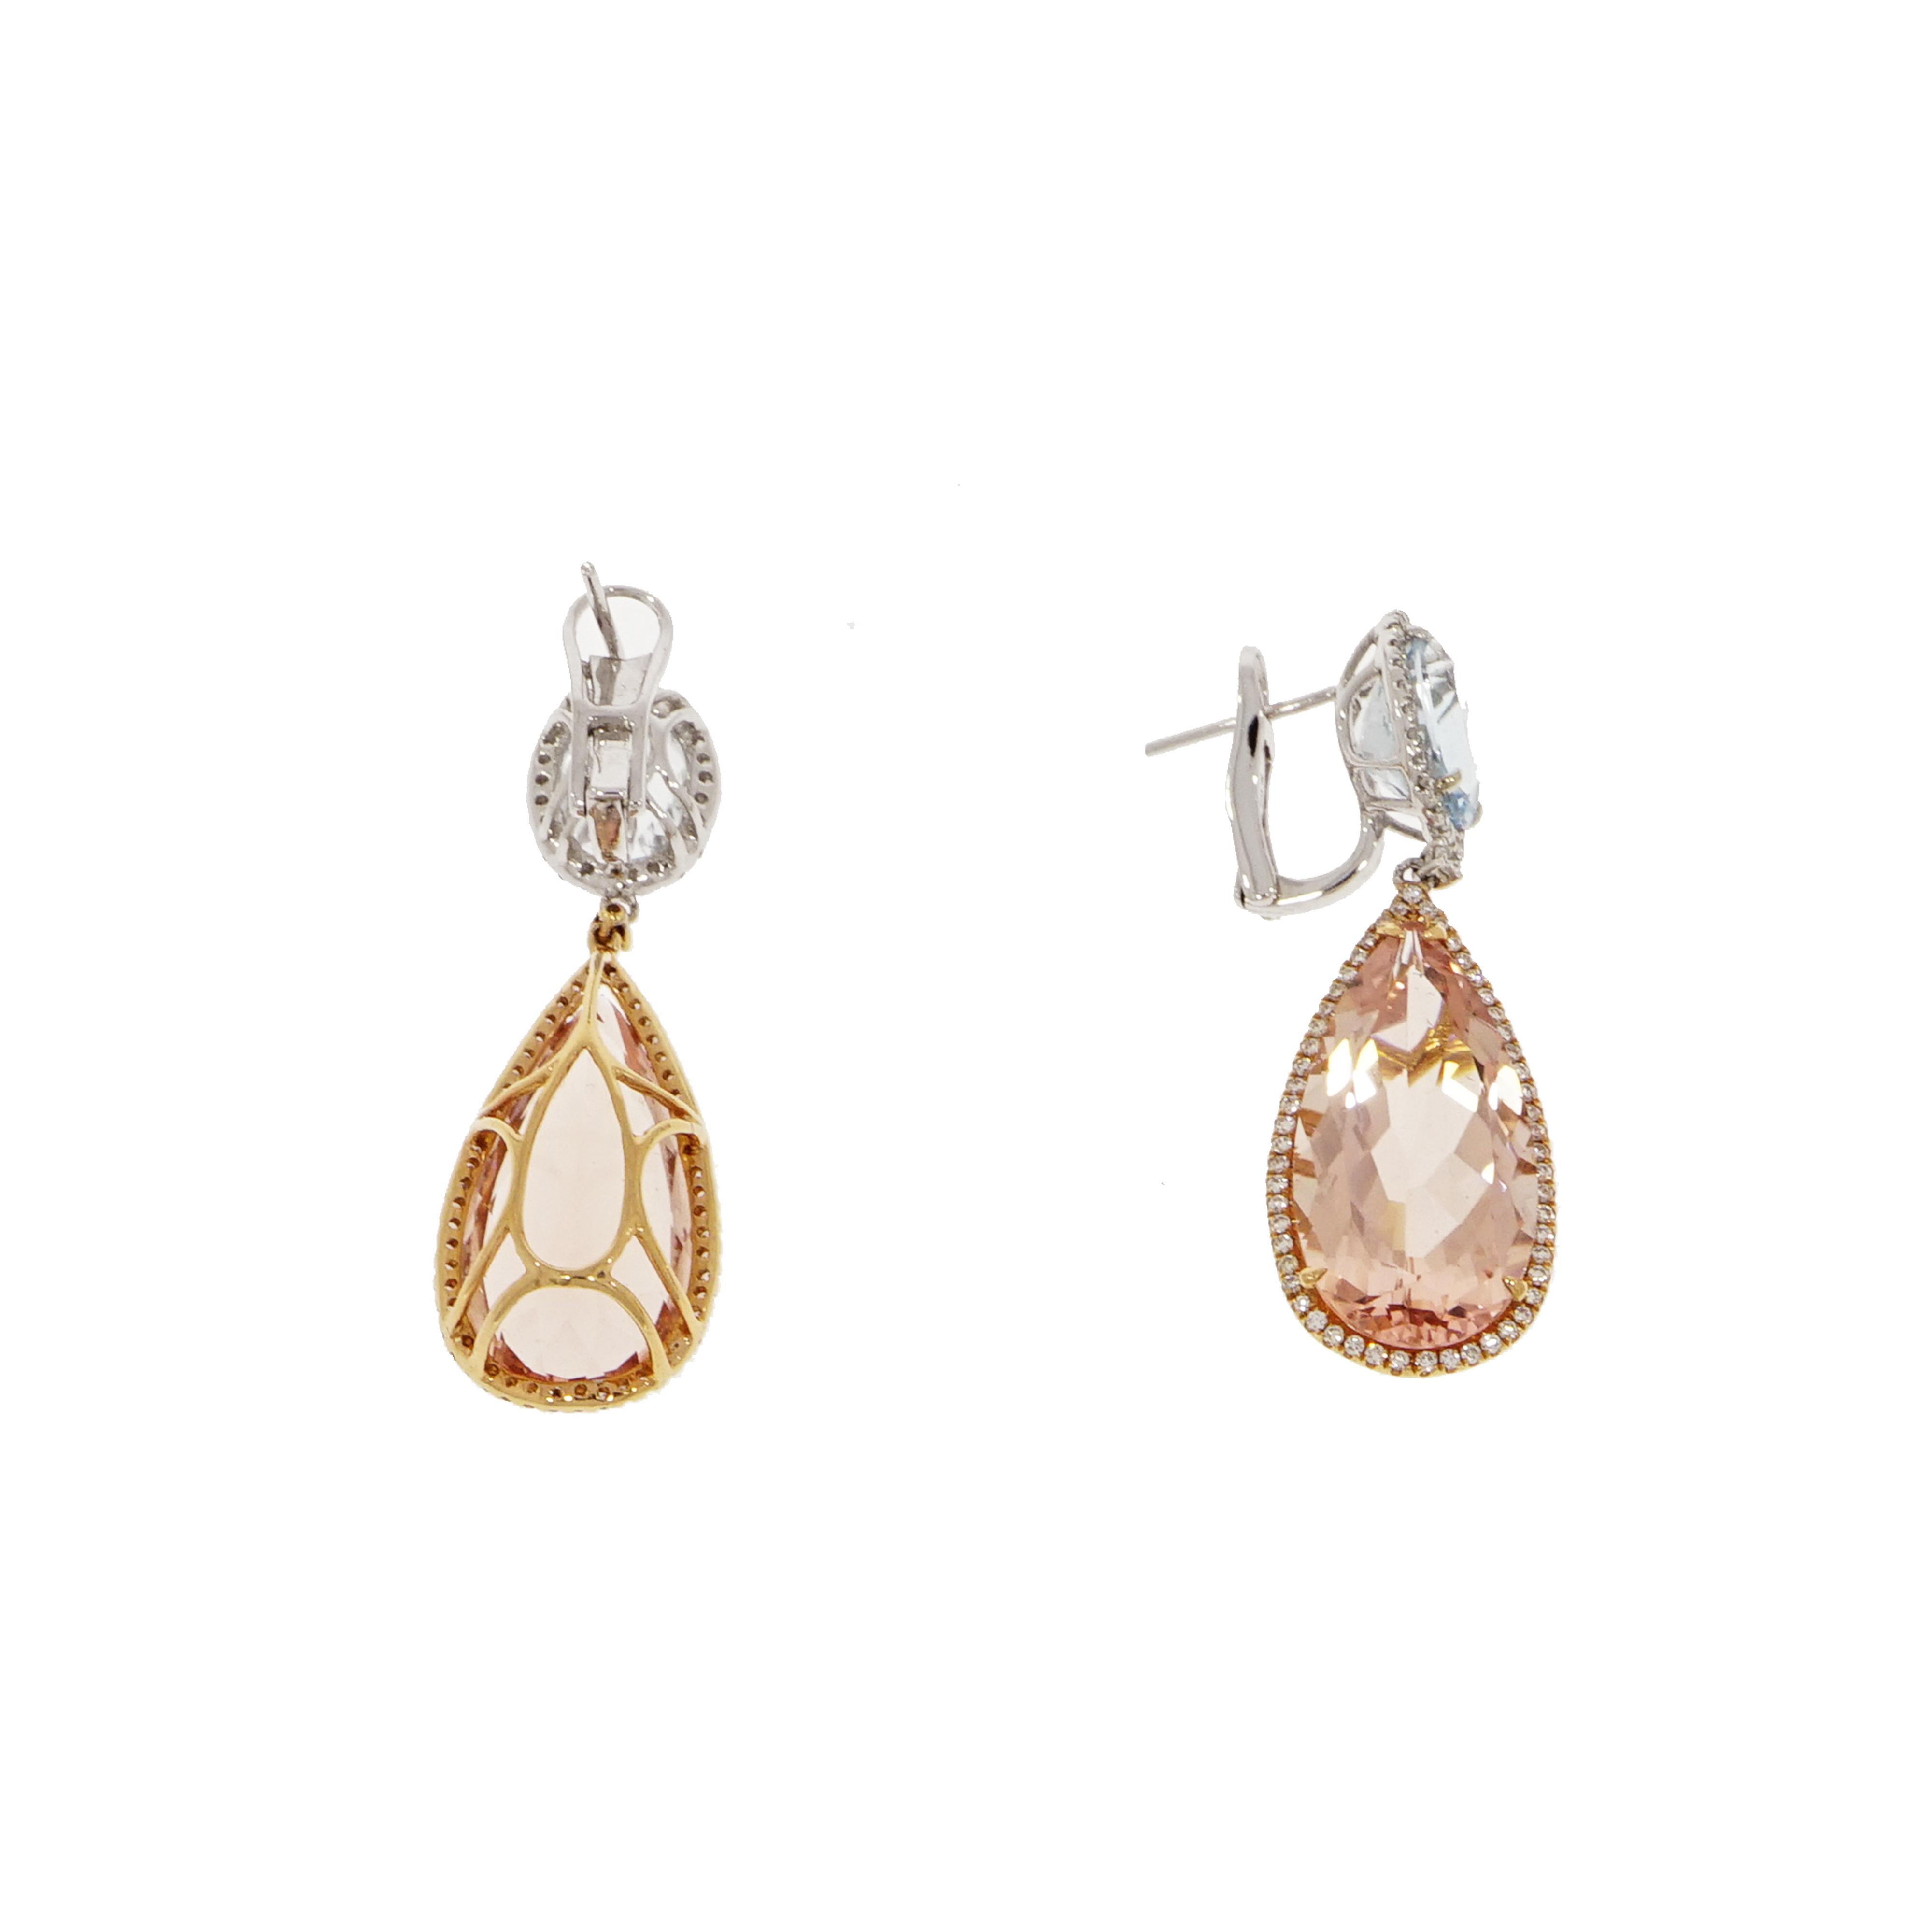 Infuse some color into your routine with eye-popping earrings like this pair of Morganite and Aquamarine Drops. 
The faceted pear shaped Morganite is expertly set in 18k rose gold and weigh approximately 18.44 carats total, suspended from an oval